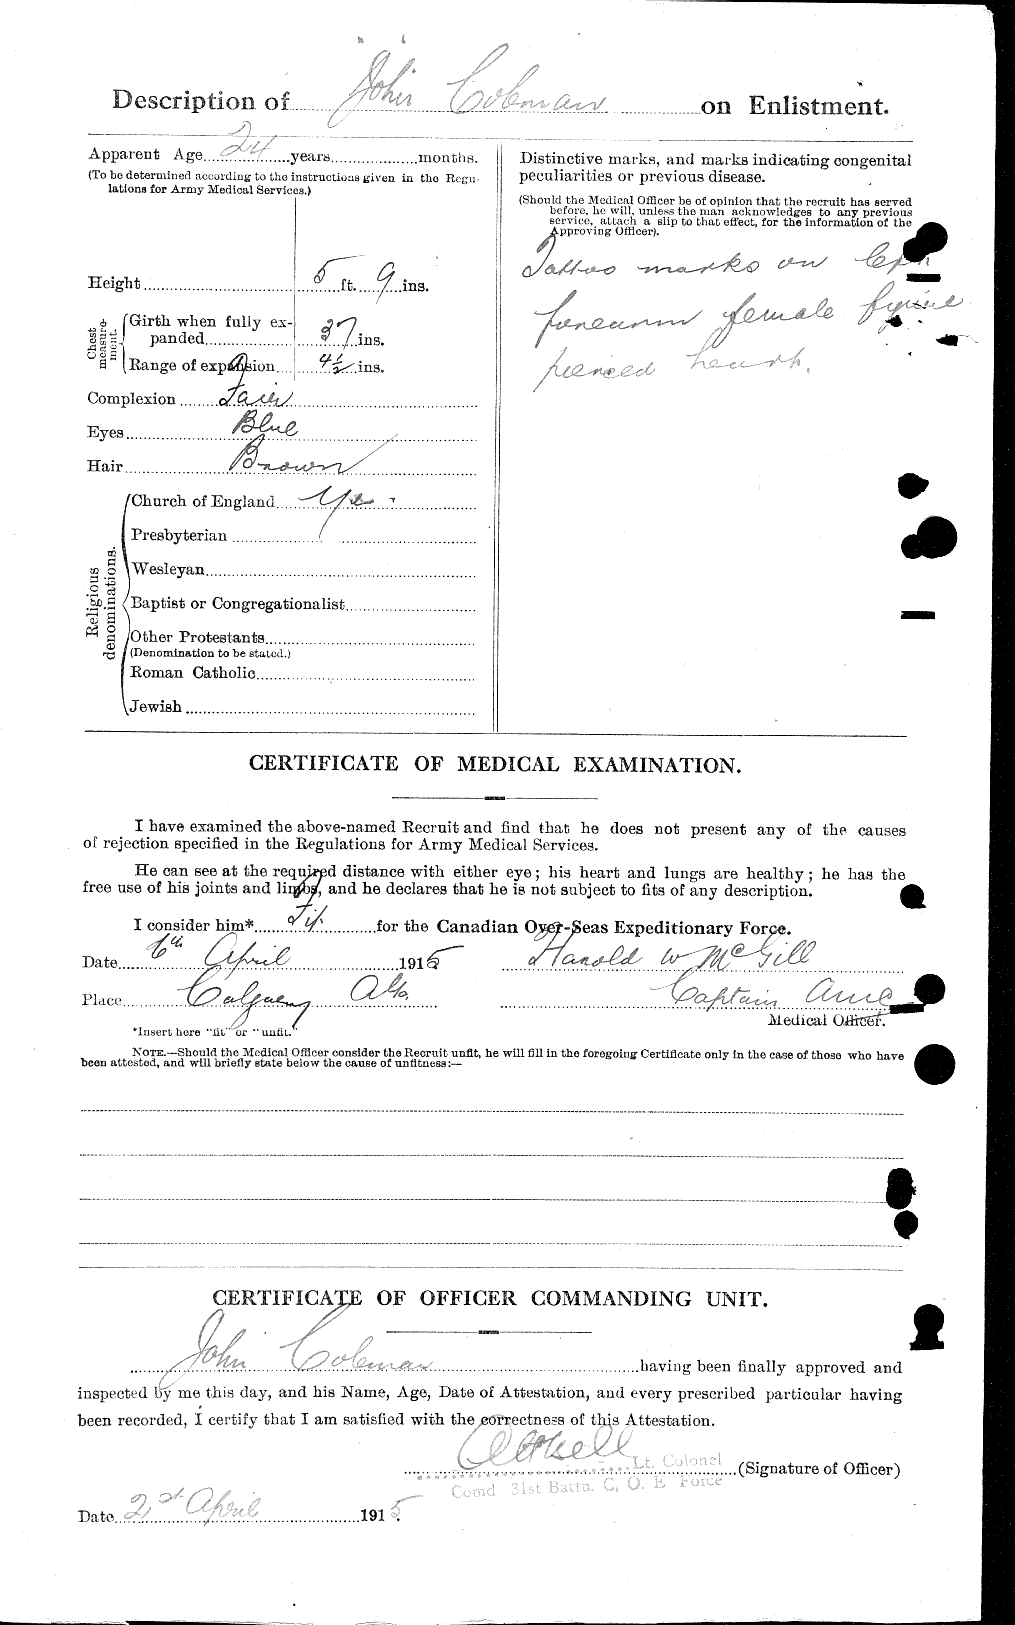 Personnel Records of the First World War - CEF 028197b